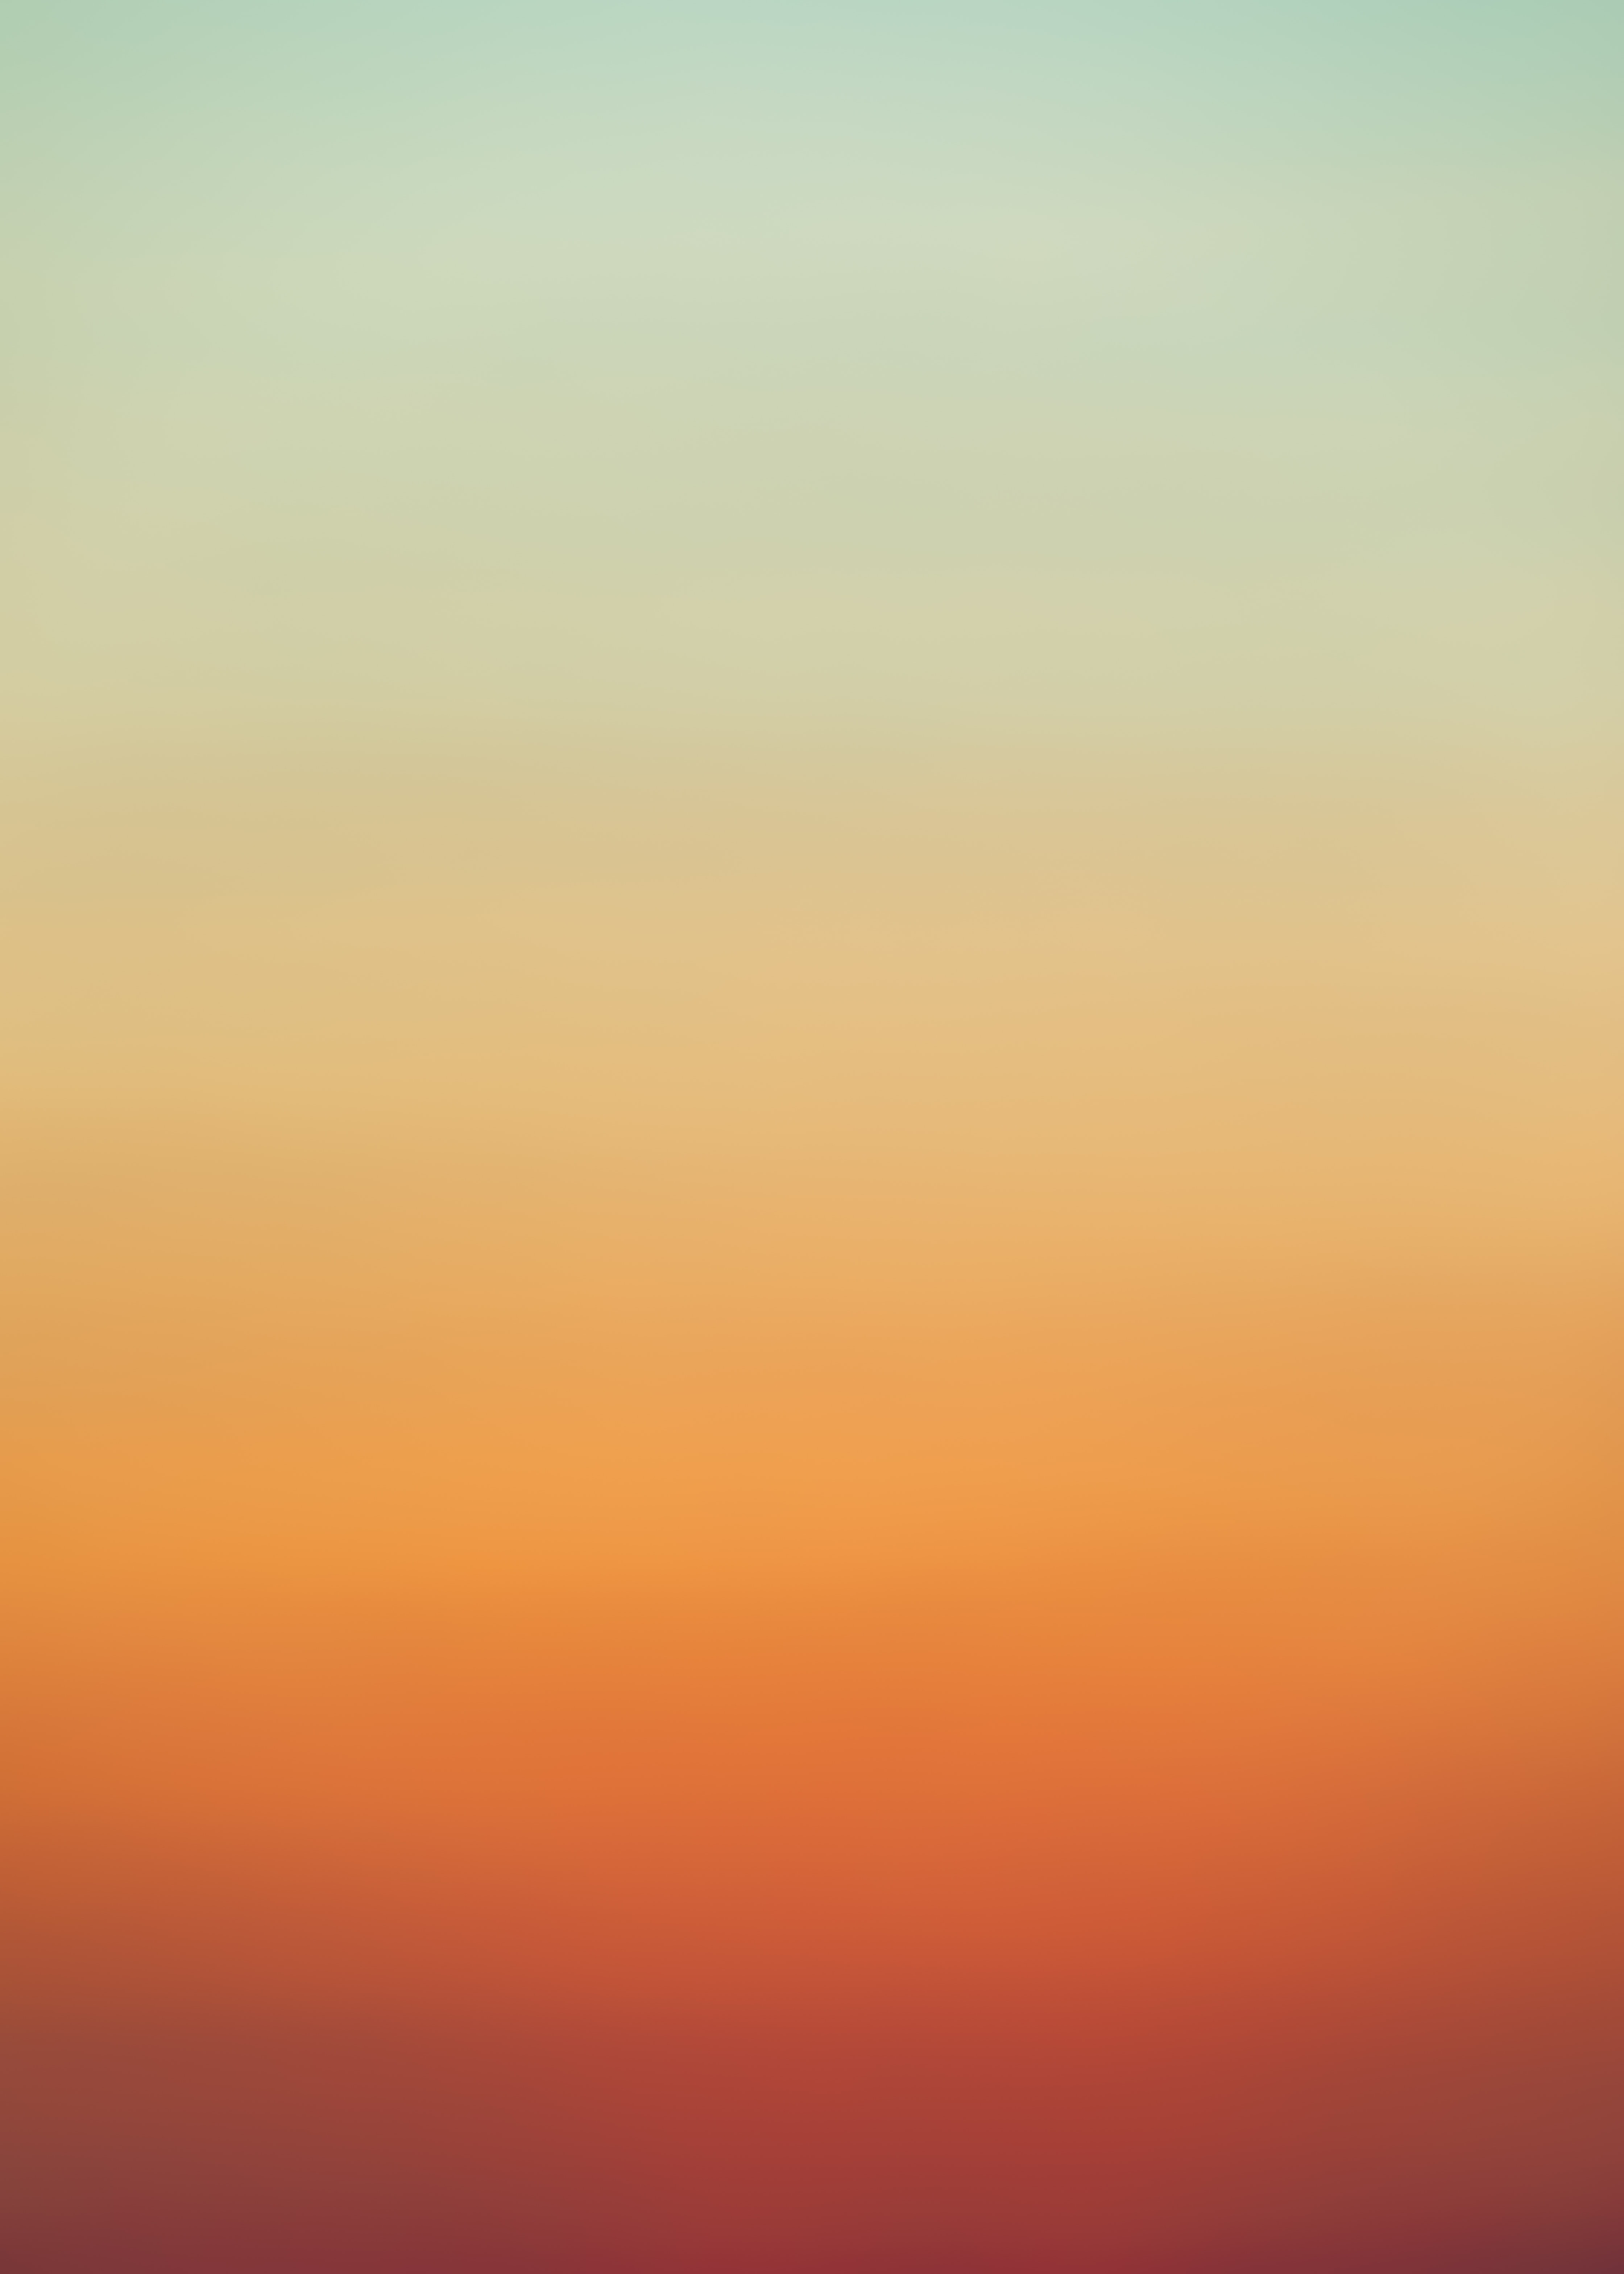 gradient, abstract, background, yellow, orange, color phone background